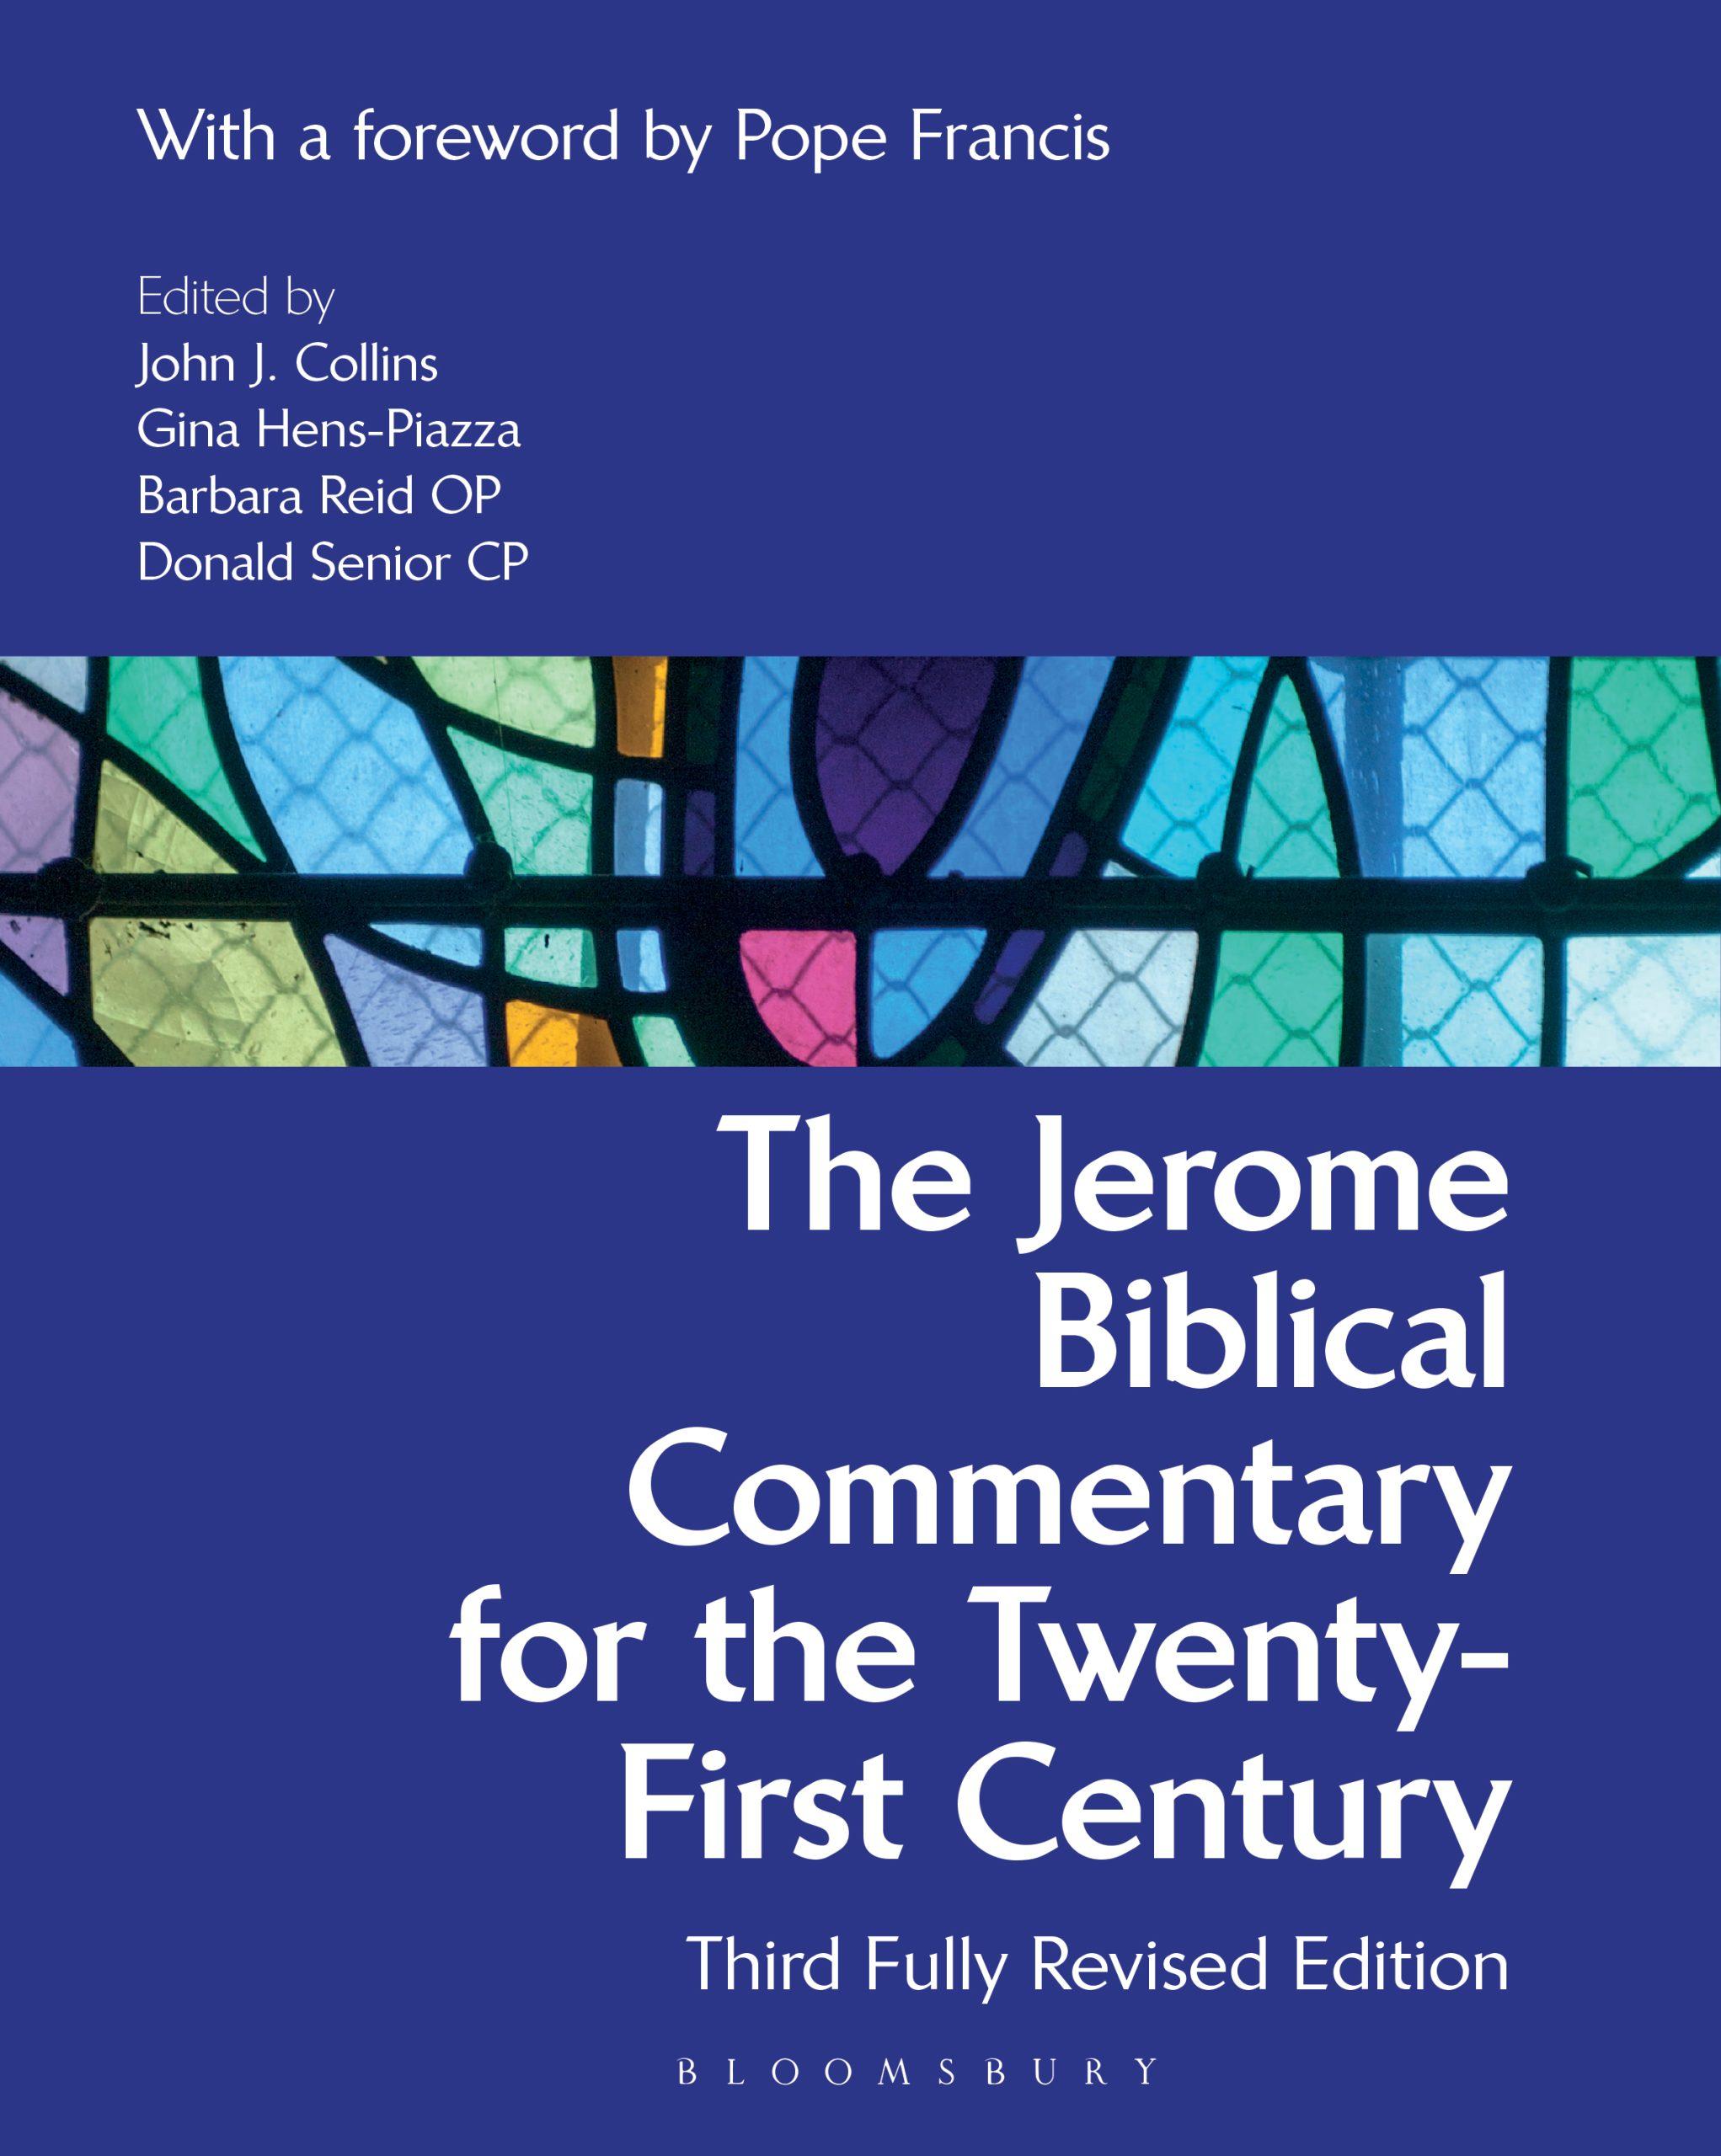 Revised　for　–　Fully　Book　Biblical　Twenty-First　Century:　Commentary　Third　Omega　World　the　Jerome　The　Edition